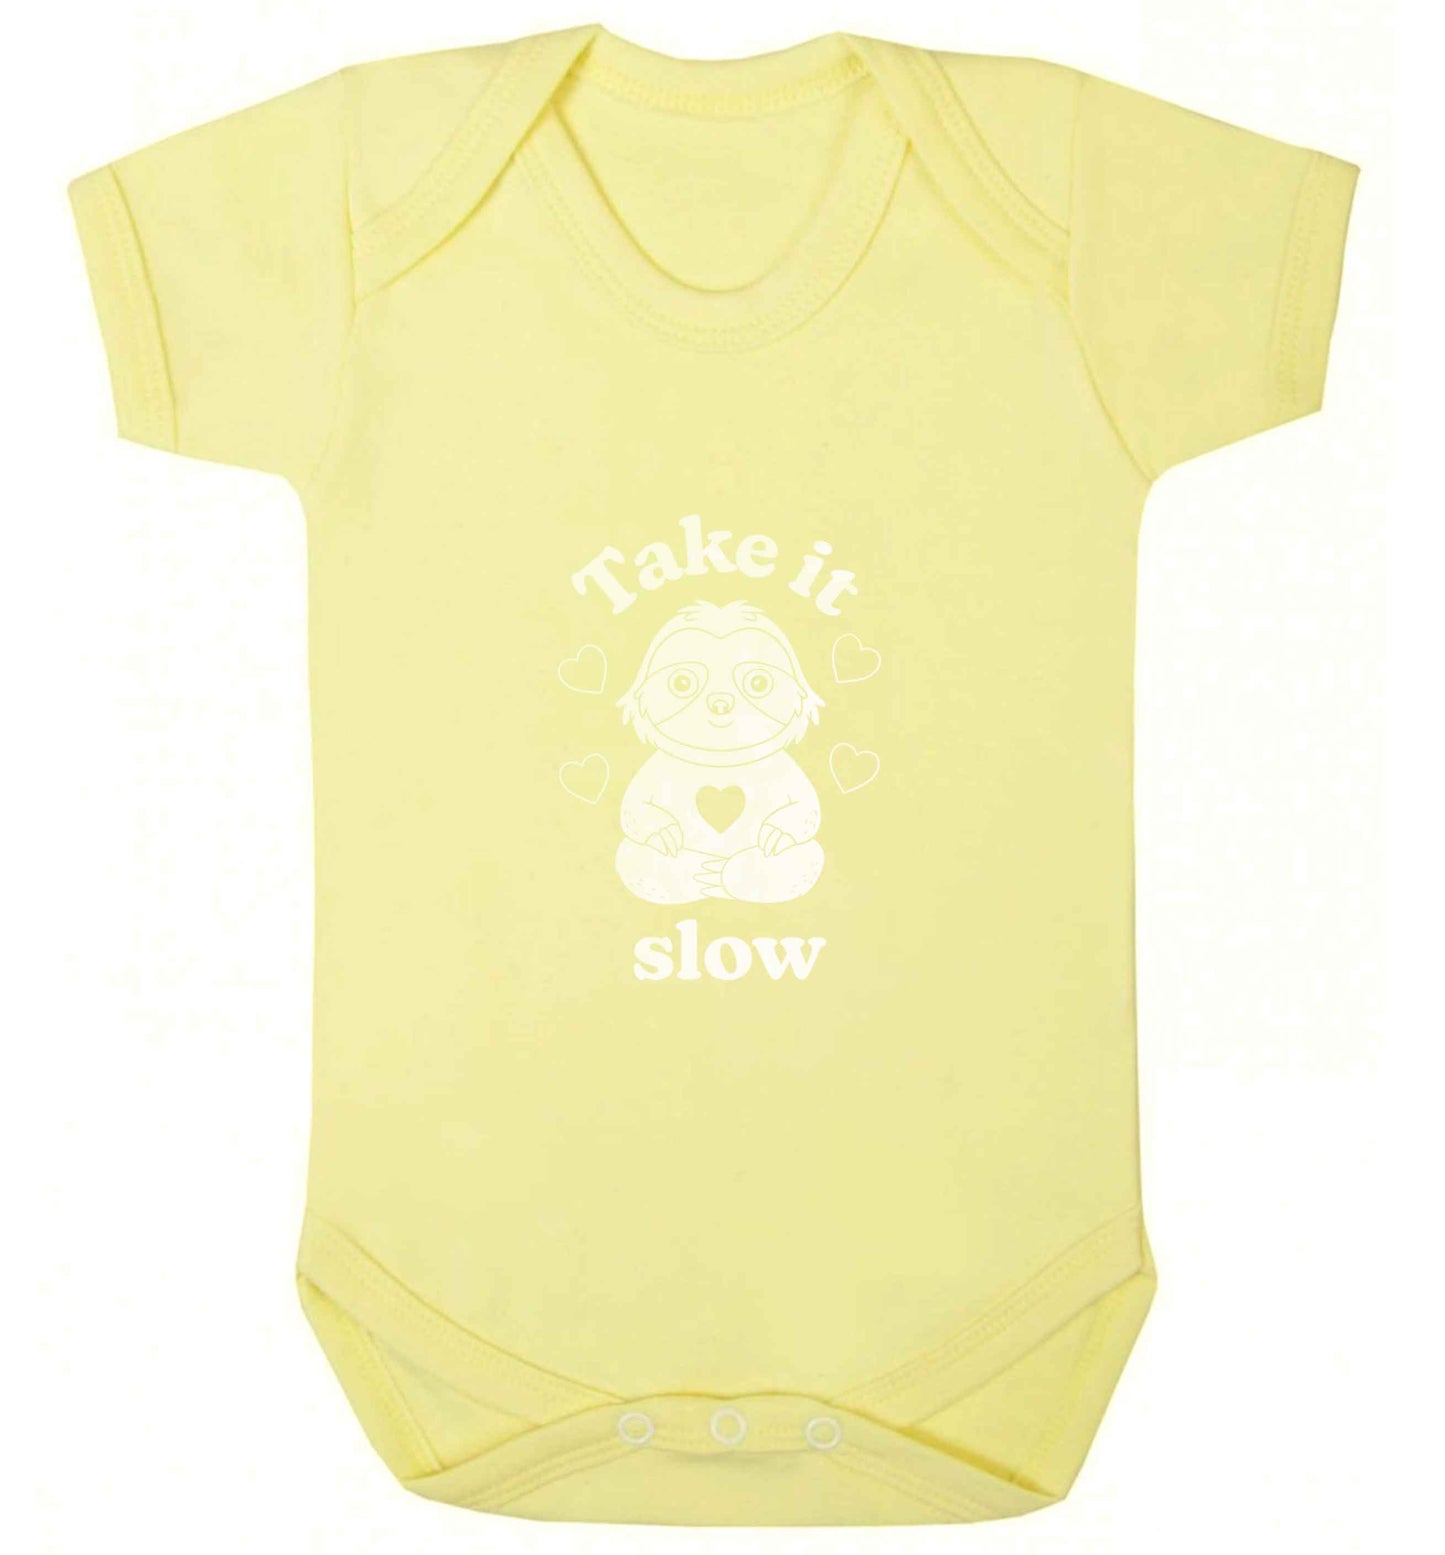 Take it slow baby vest pale yellow 18-24 months